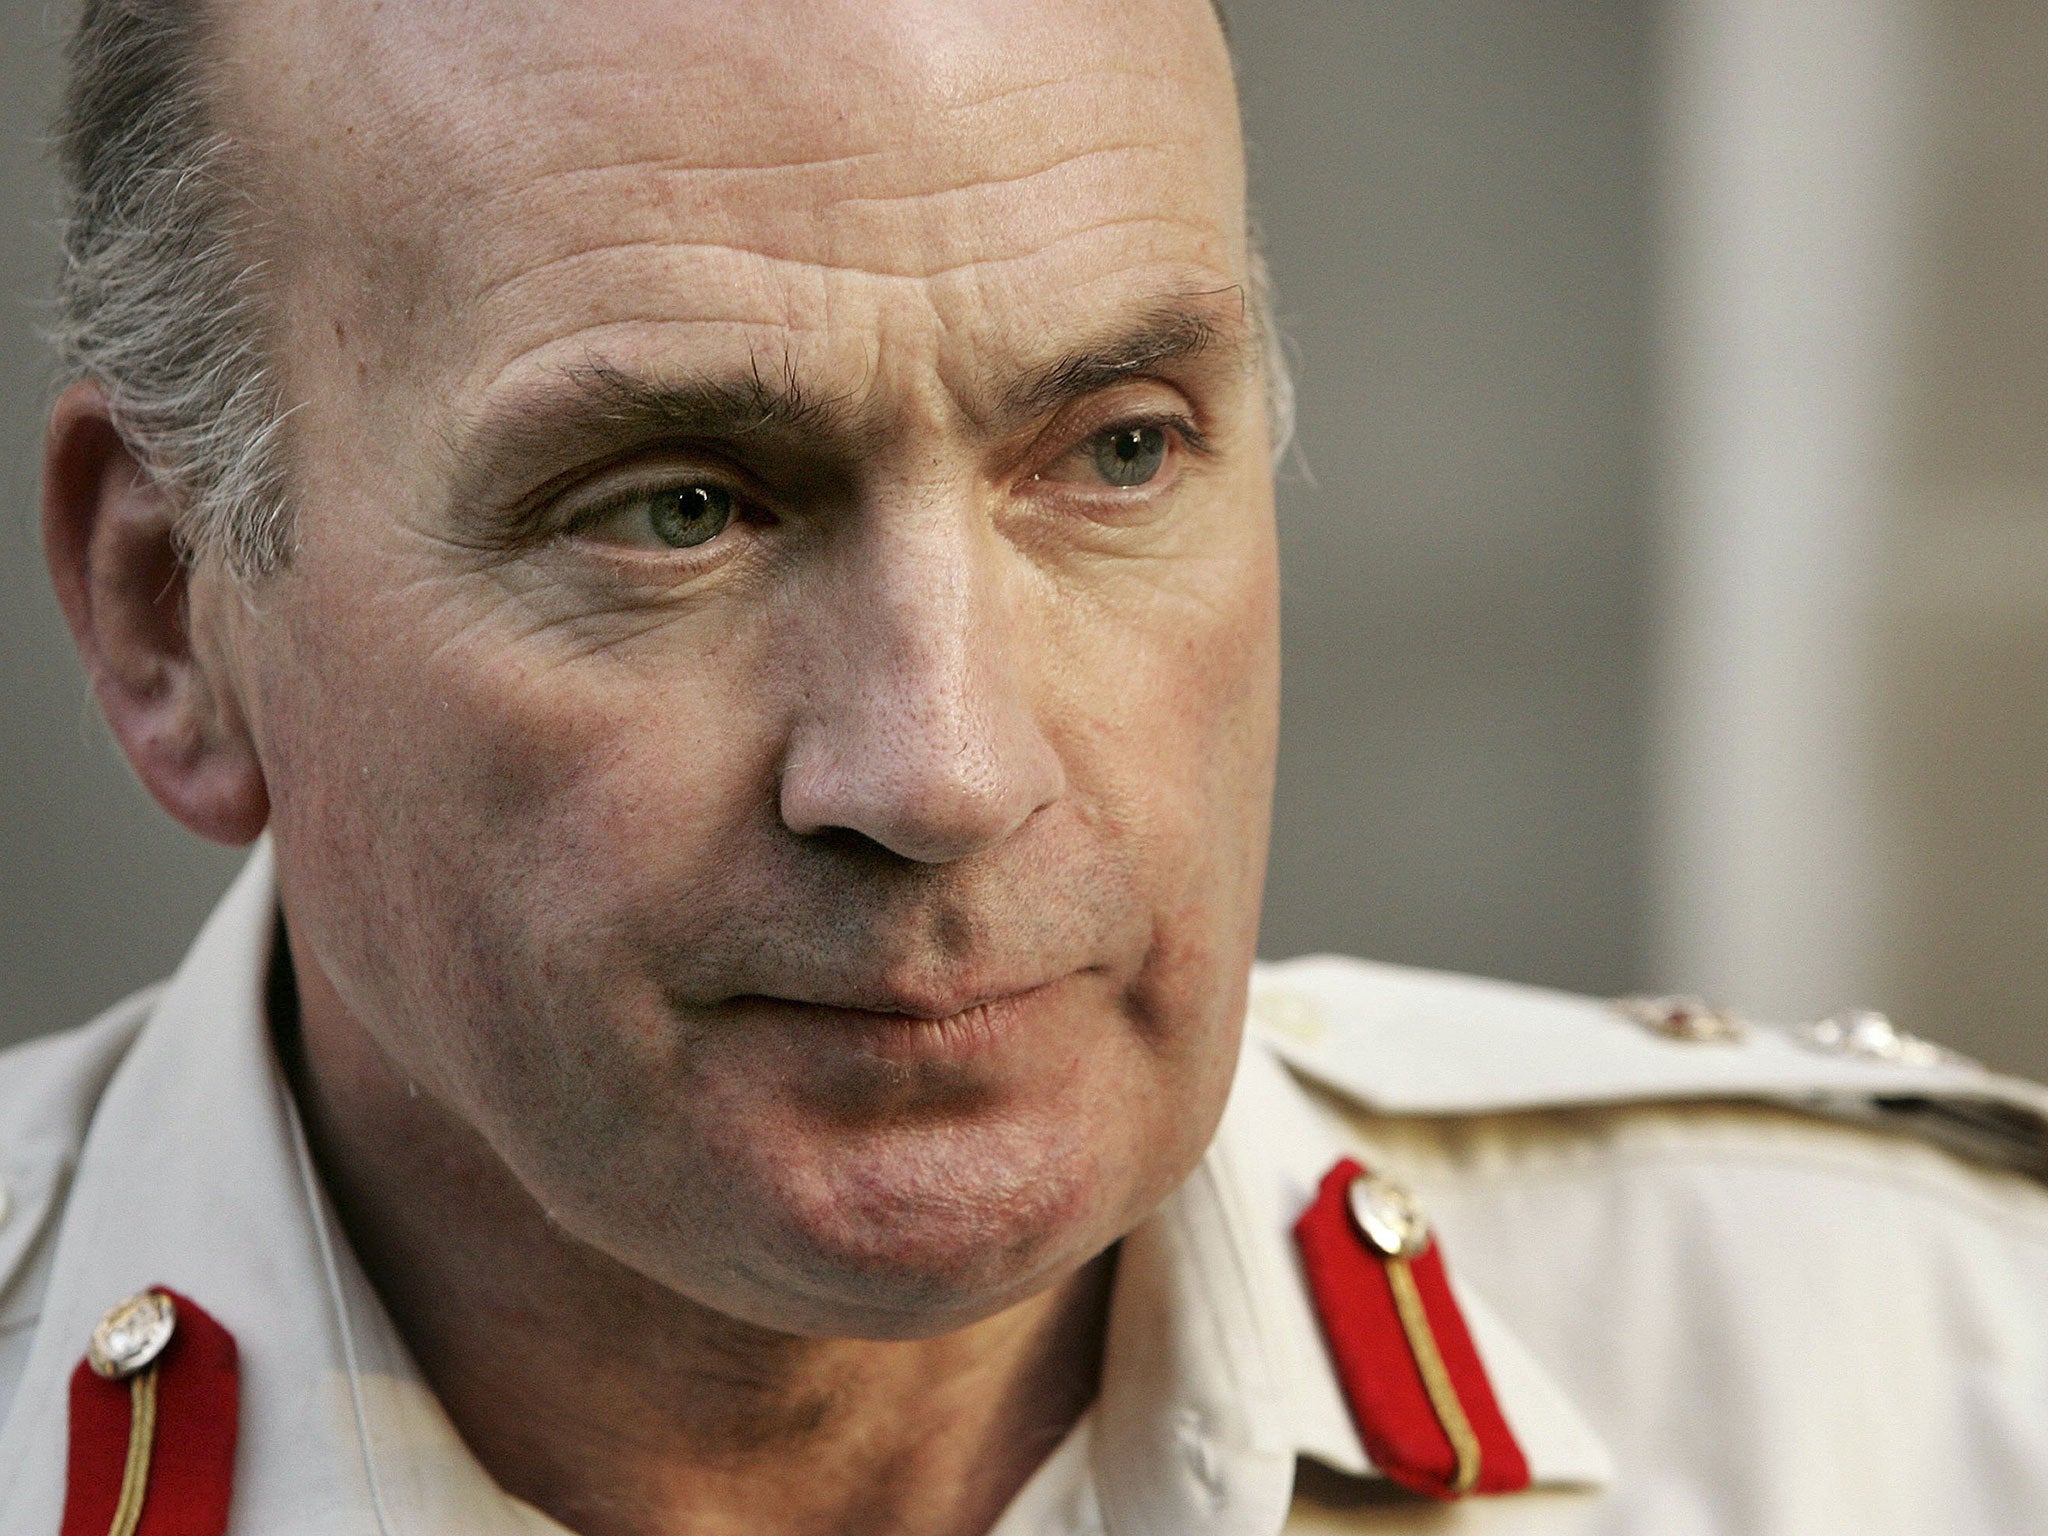 Sir Richard Dannatt said 'the nation would expect' Parliament to be recalled to debate British involvement in Iraq